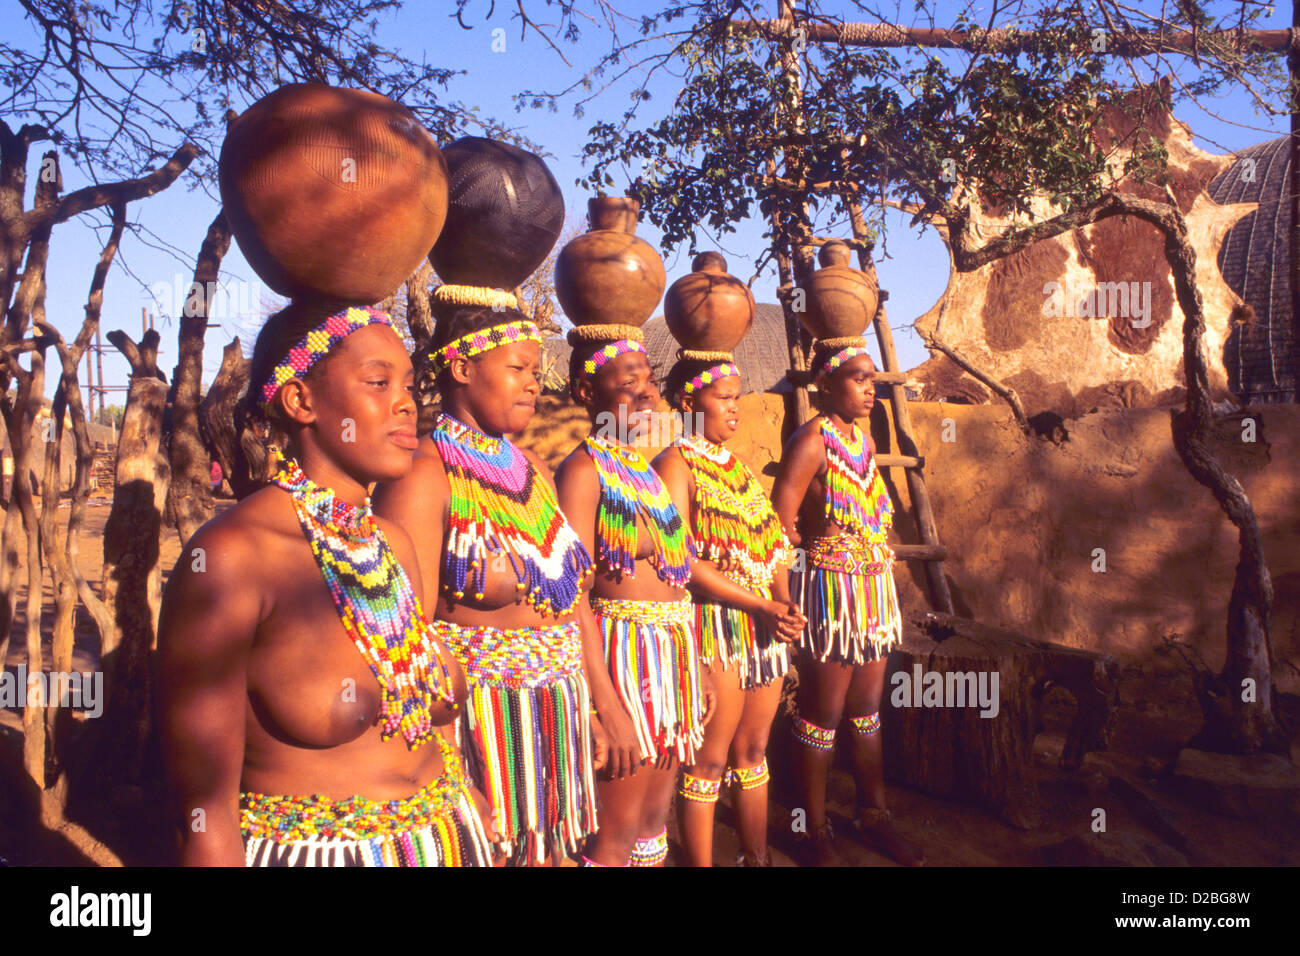 Stock Photo of Colorful Women in Native Zulu Tribe at 